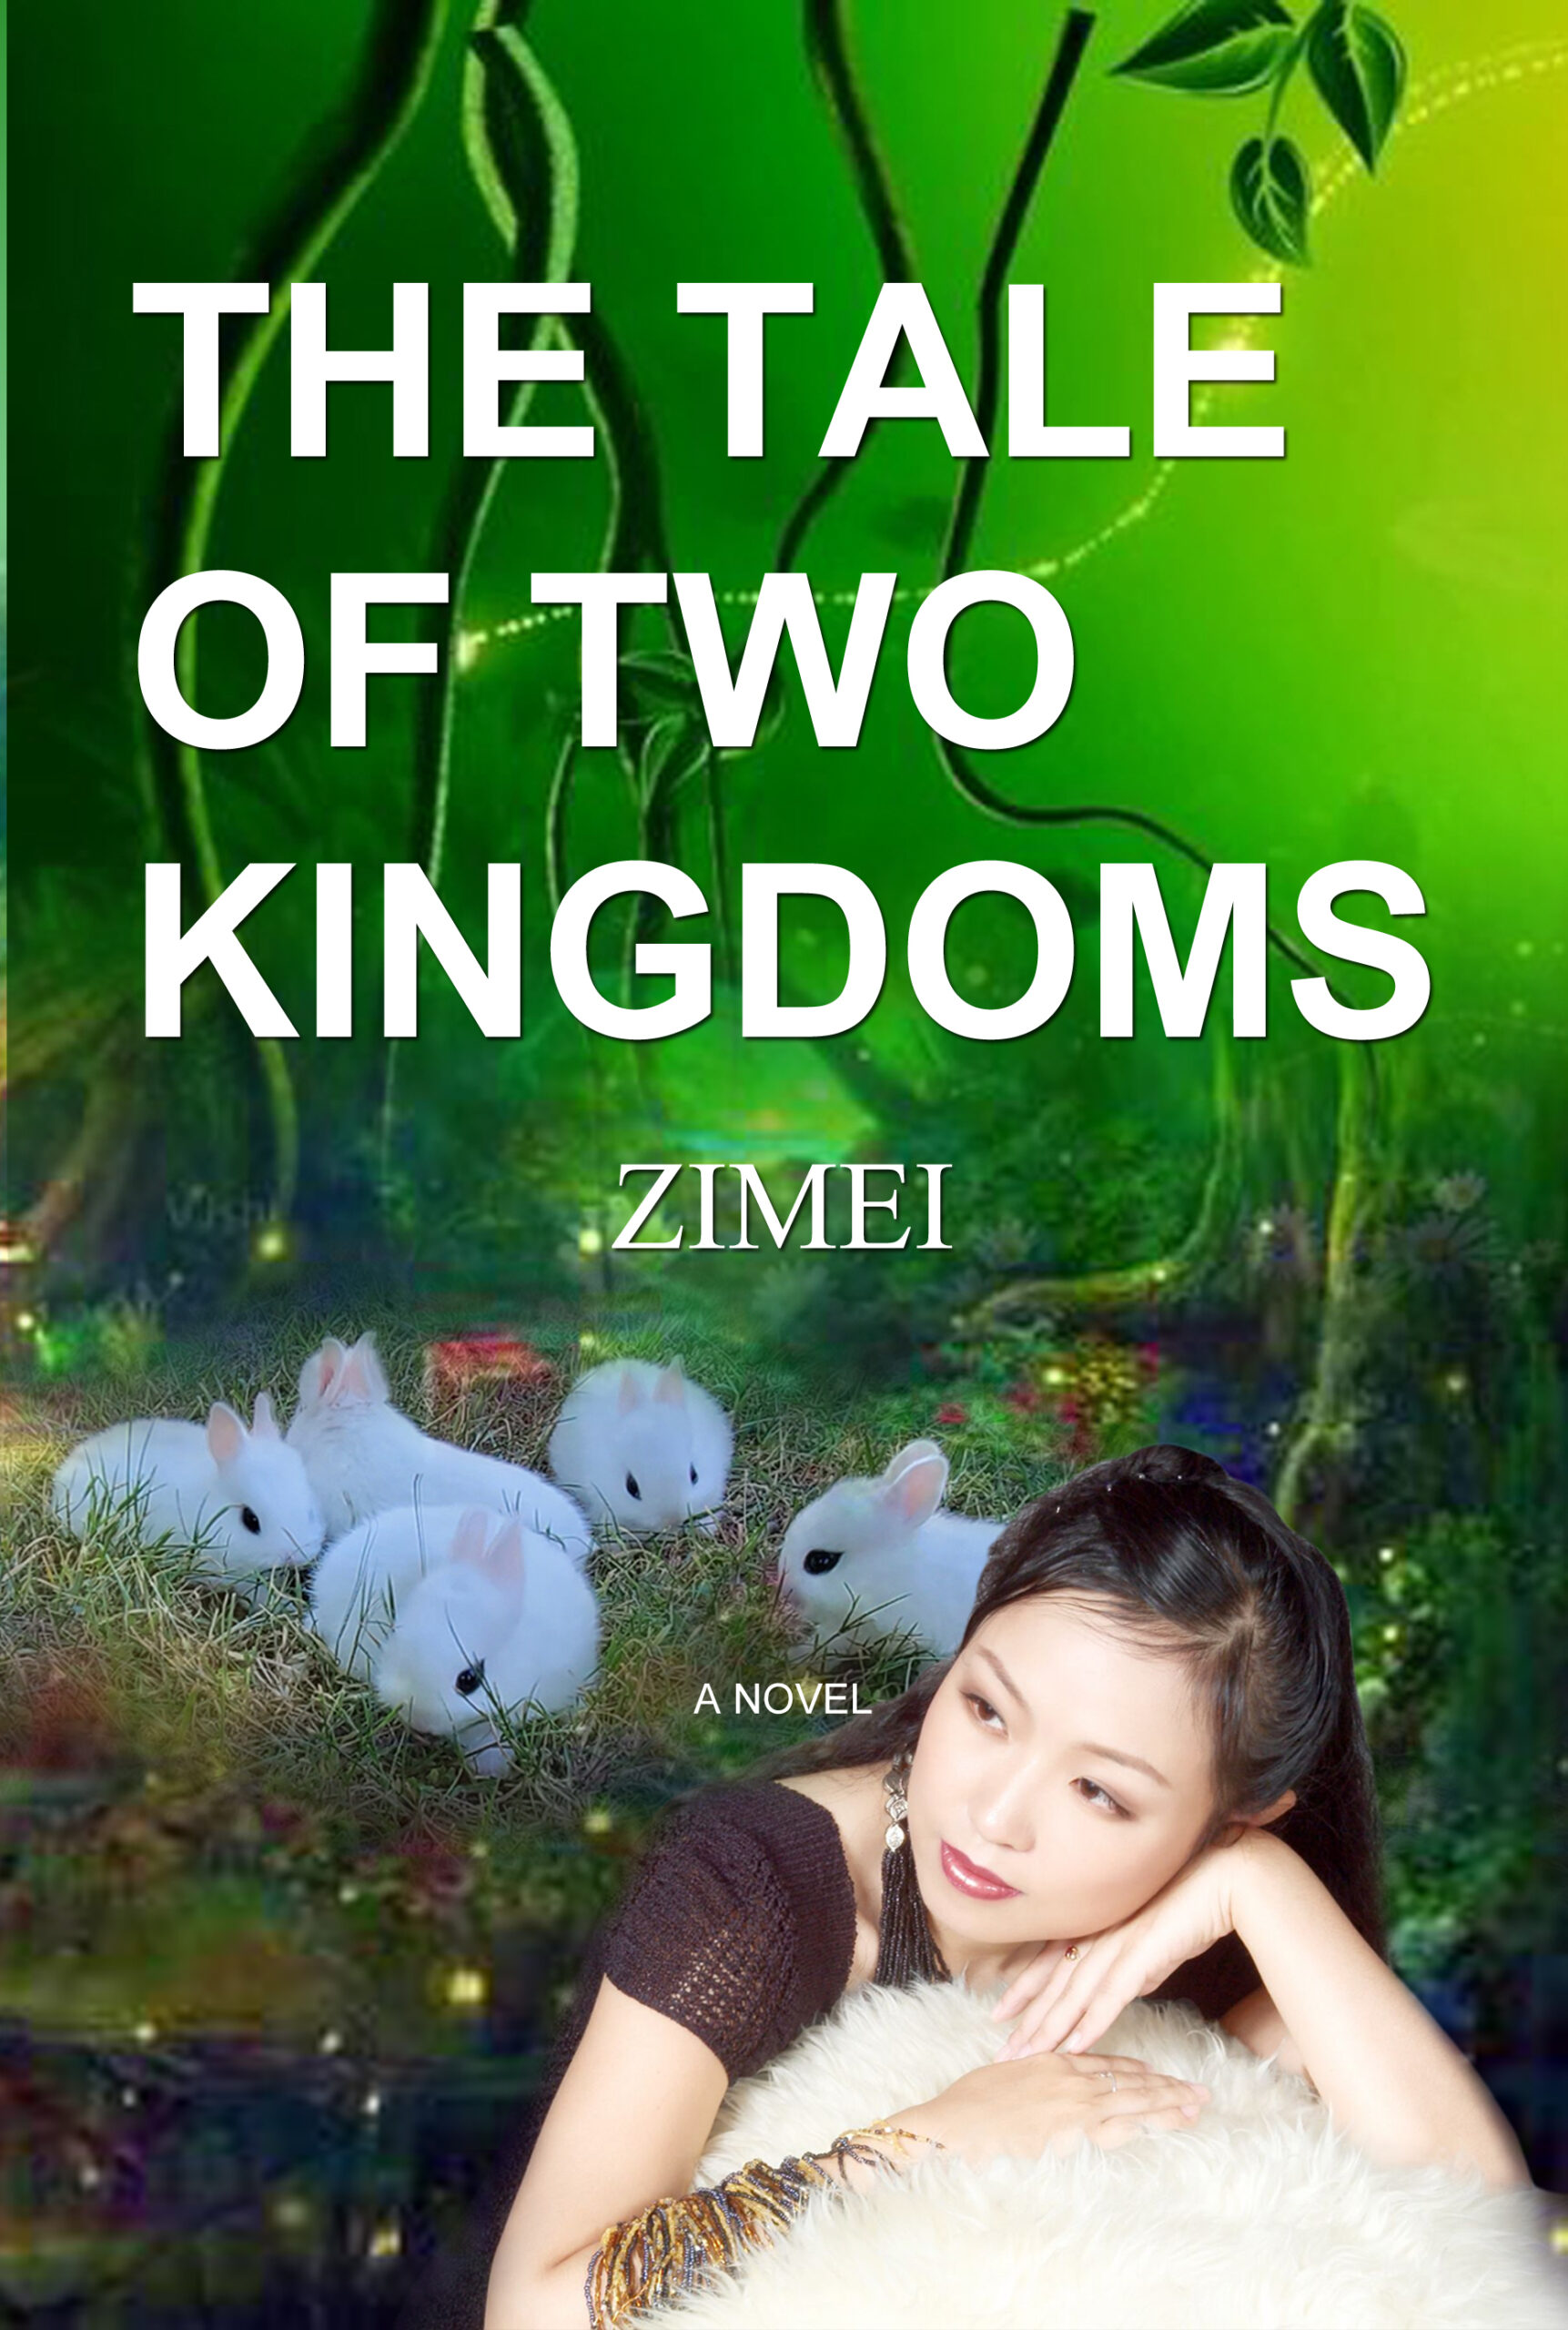 FREE: THE TALE OF TWO KINGDOMS by Zimei Gao